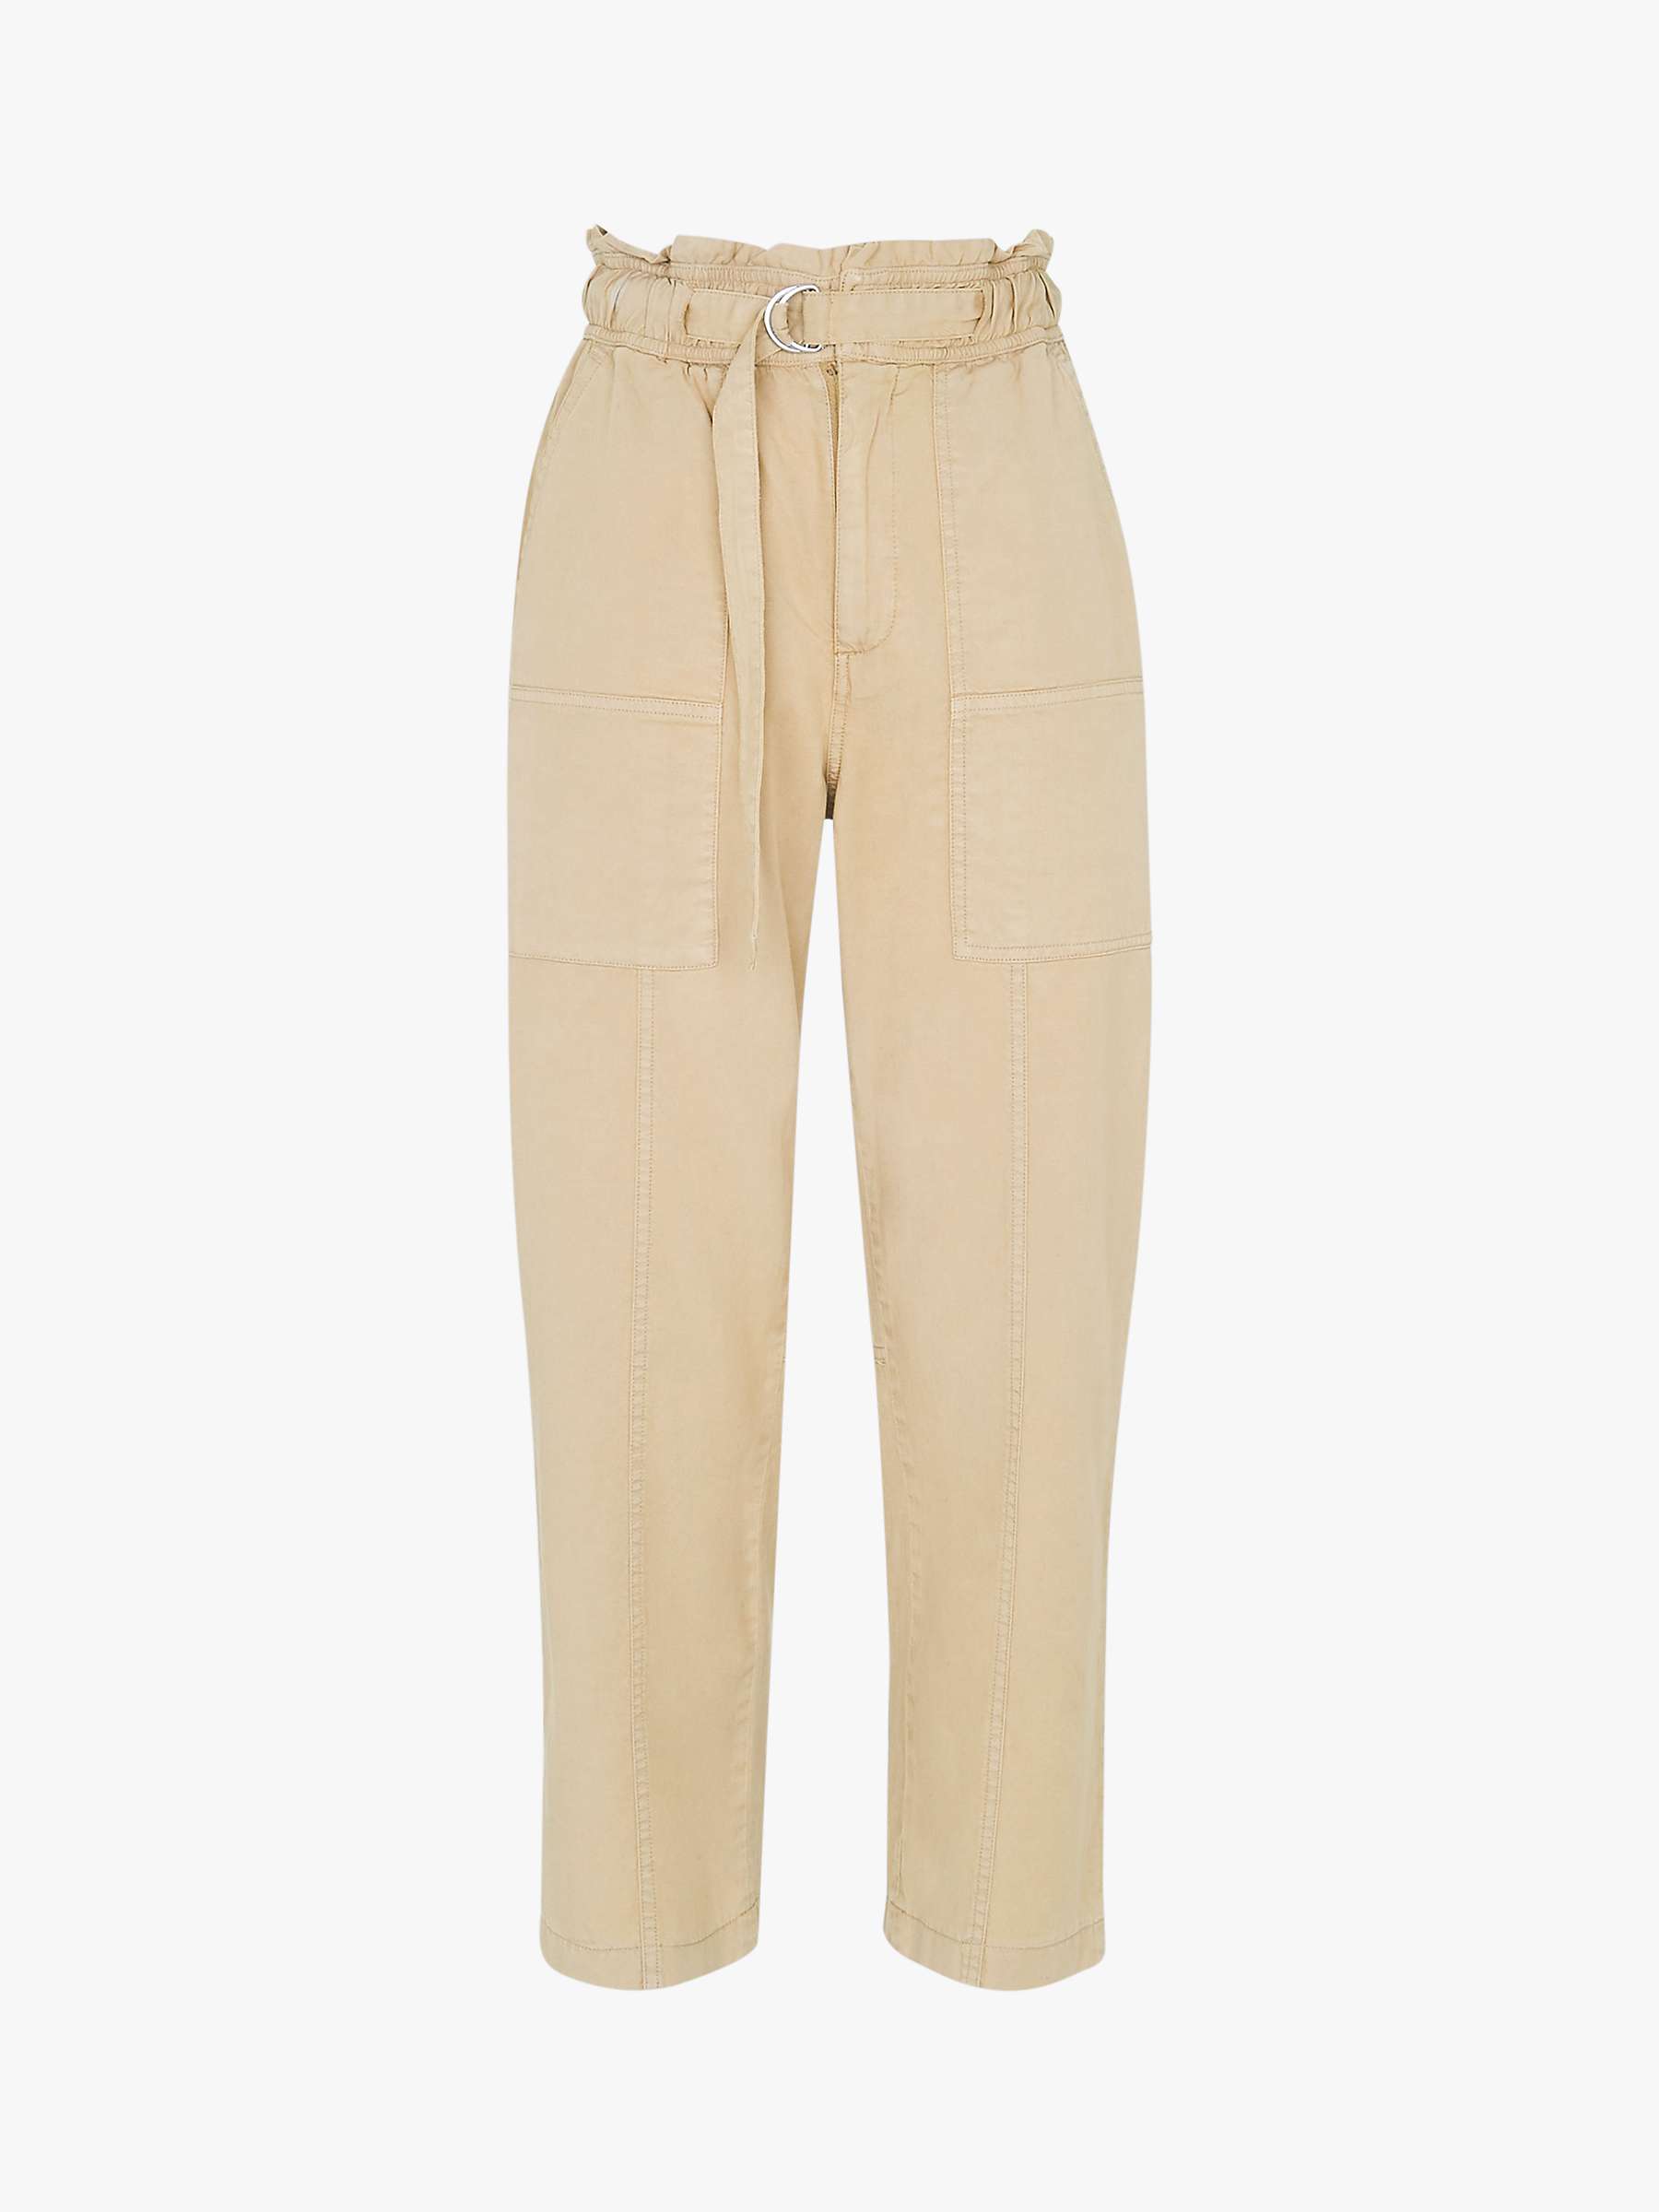 Whistles Cargo Straight Leg Trousers, Camel at John Lewis & Partners